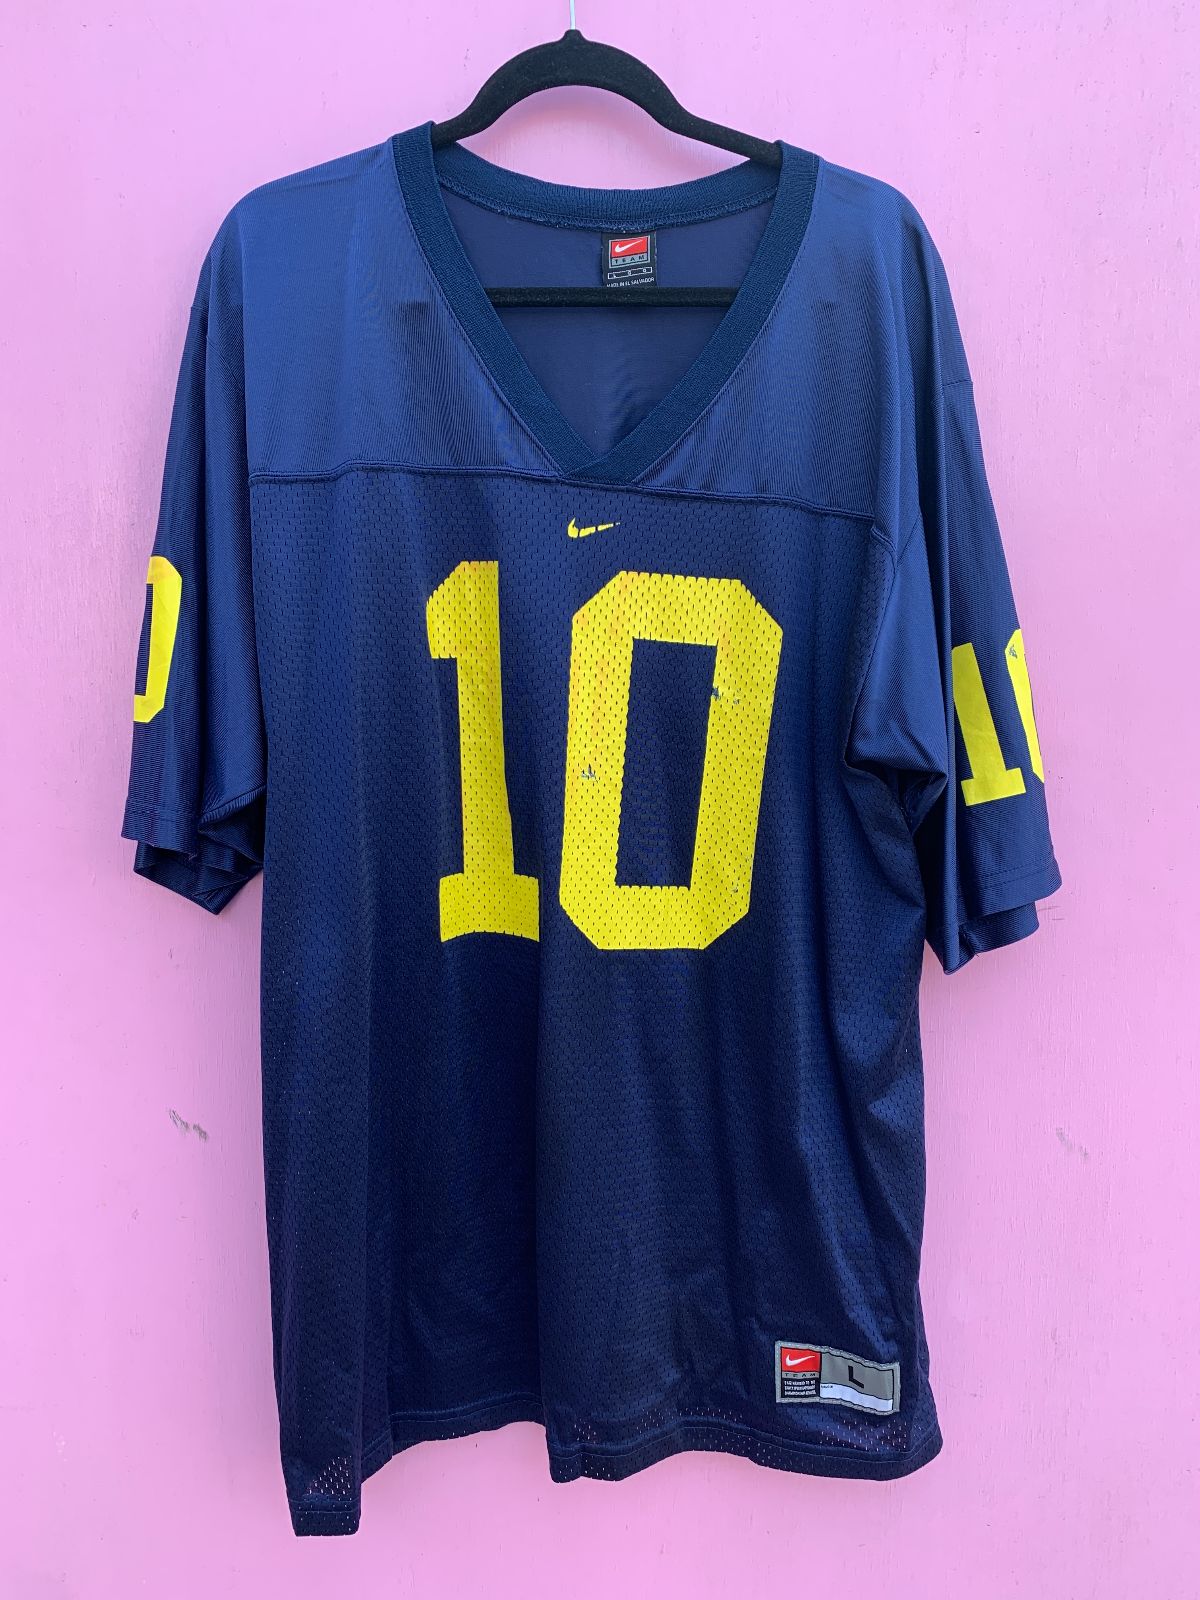 product details: NCAA MICHIGAN WOLVERINES #10 FOOTBALL JERSEY photo